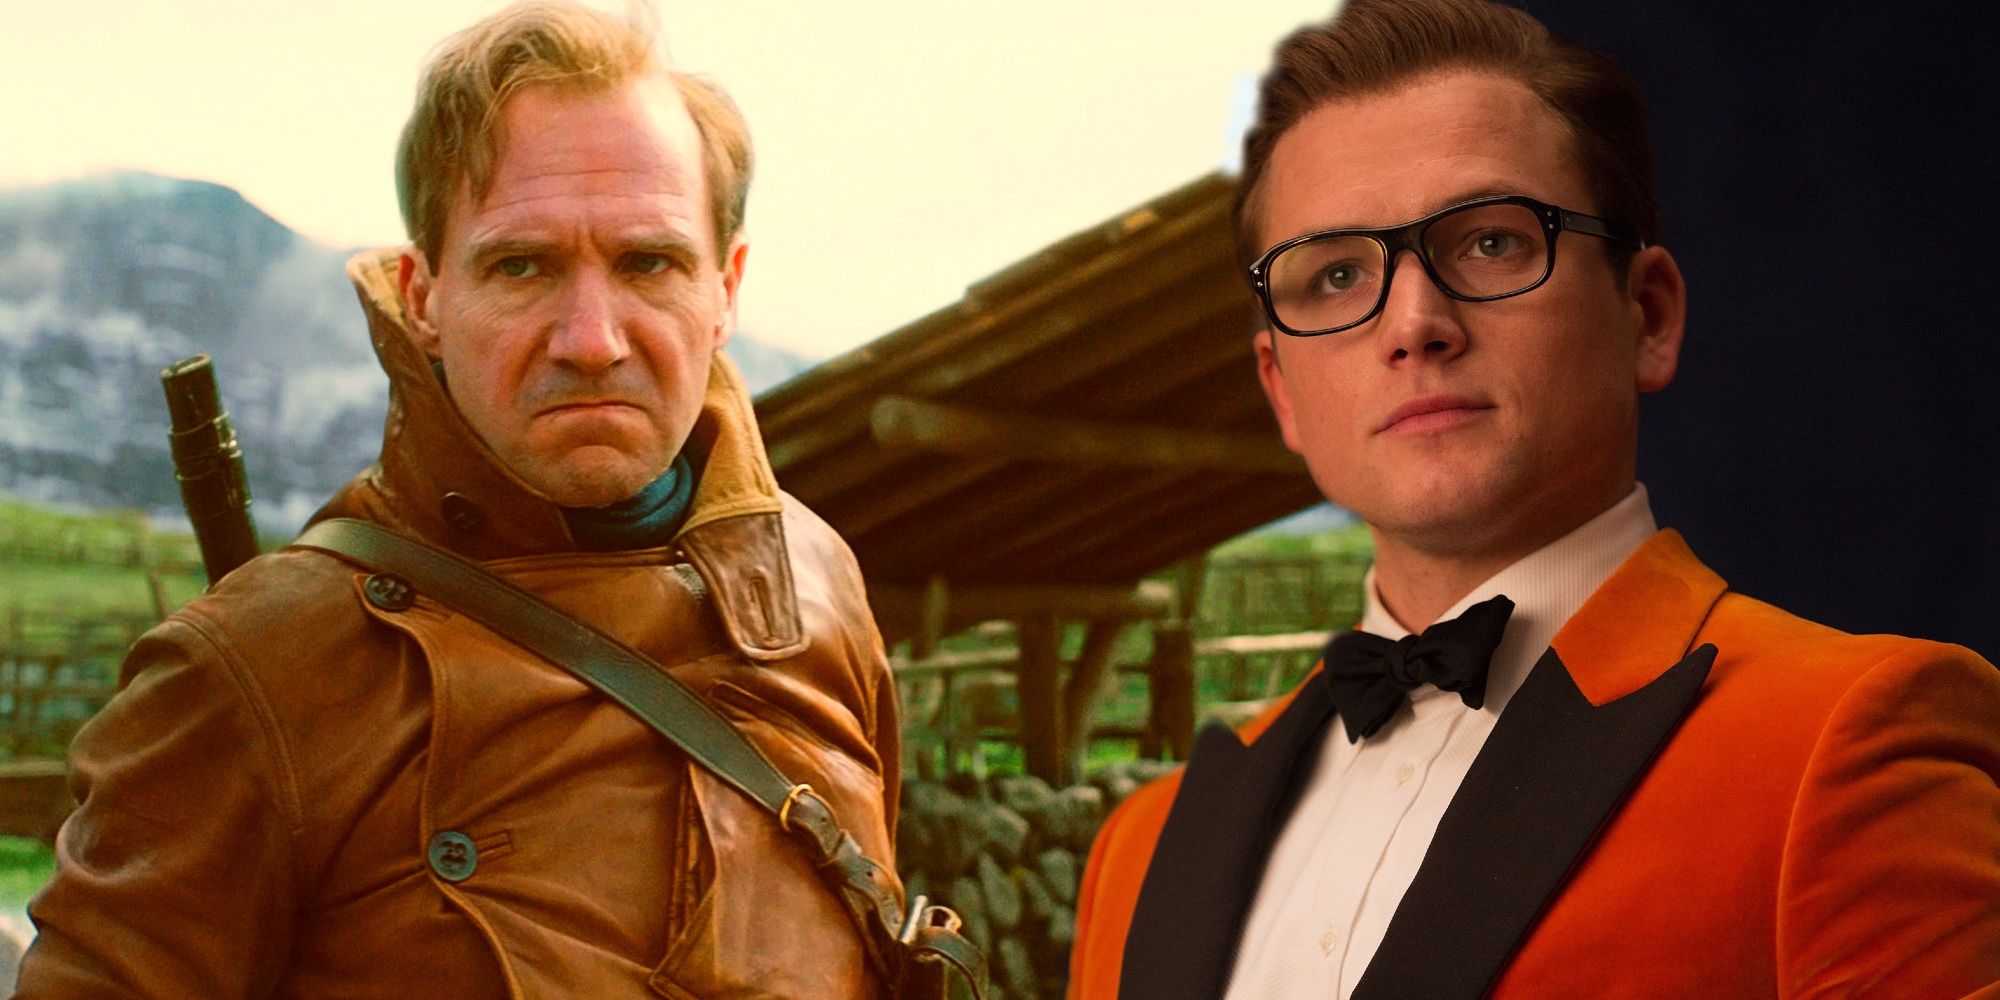 Kingsman: The Blue Blood - Cast, Story & Everything We Know About